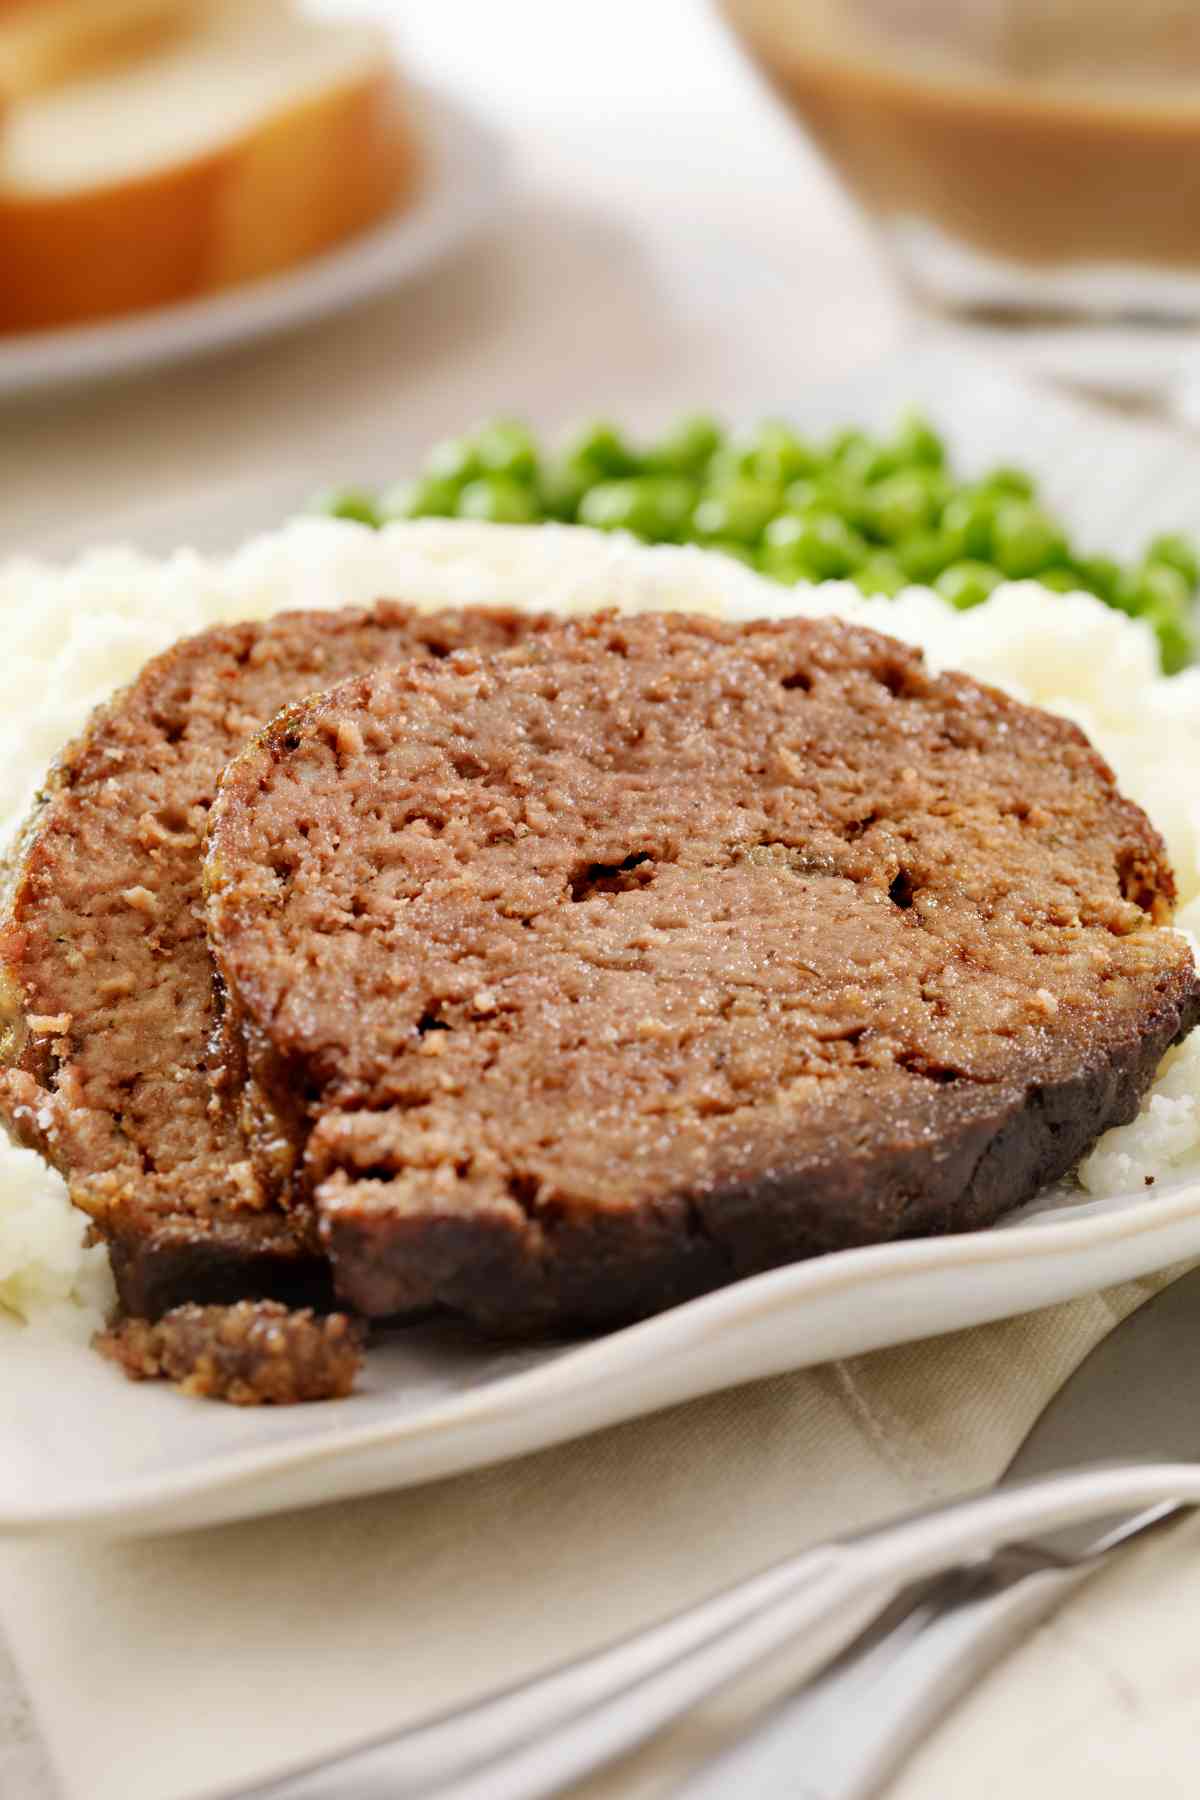 For the most delicious homemade meatloaf, you’ve got to pay attention to both the oven temp and the internal temp. At the right temperatures, your loaf will turn out moist, perfectly sliceable and full of flavor. Keep reading to find out the best oven temp, internal temp and cooking time for meatloaf!